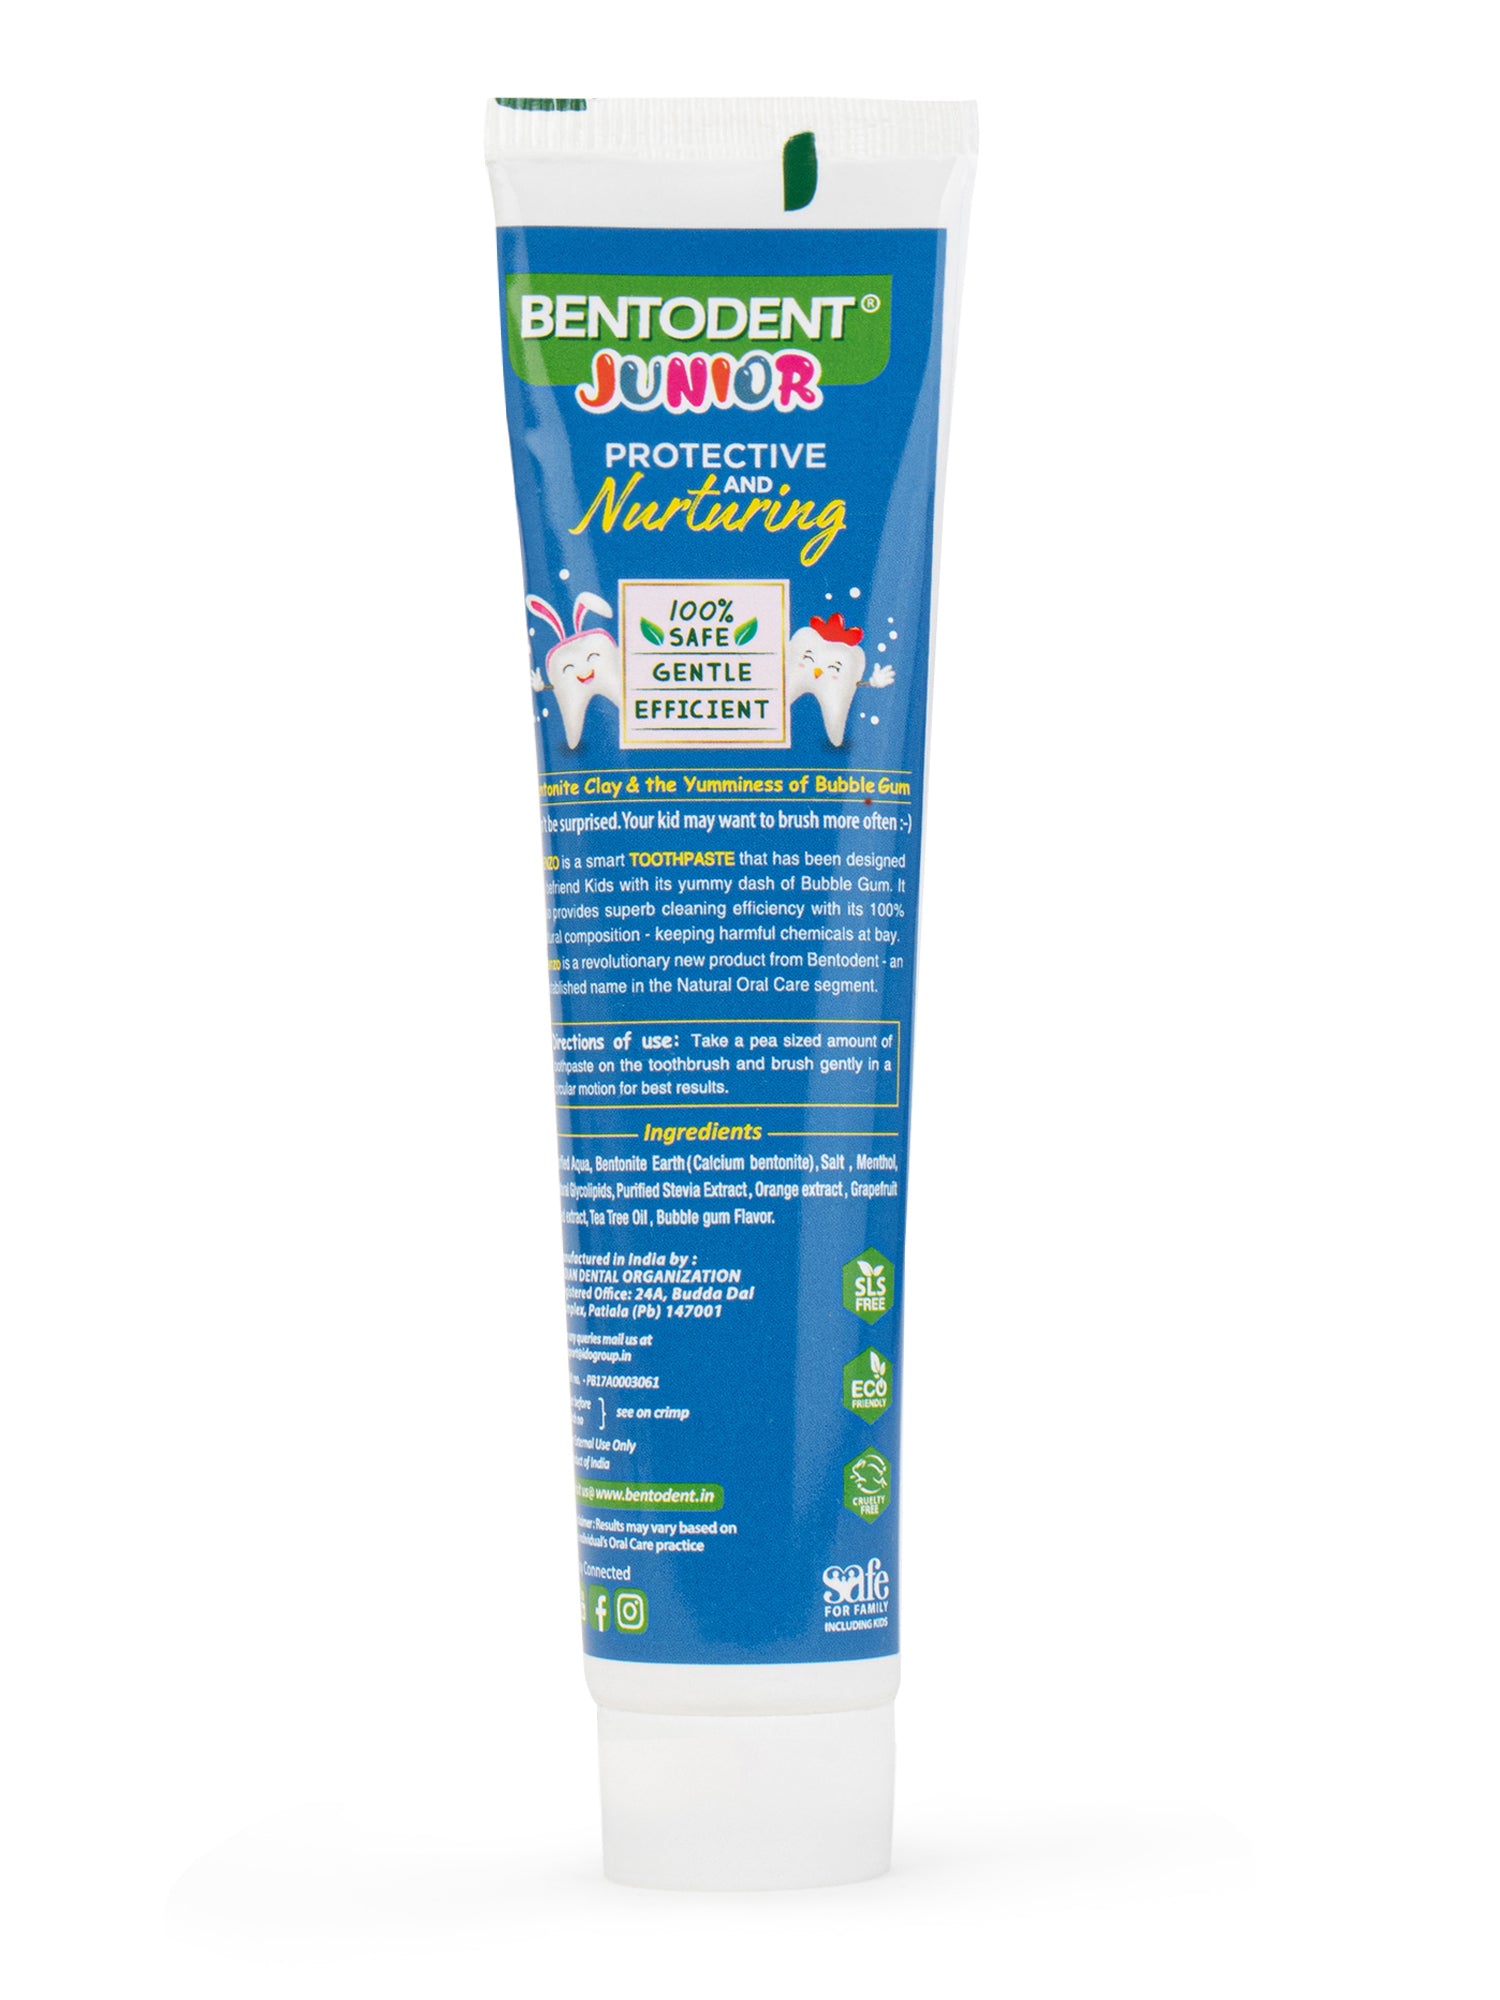 Bentodent 100% Natural Kids Bubbly Burst Toothpaste, Fluoride Free,  Sls Free, Complete oral care protection for kids, Fresh Breath, Best toothpaste for kids 2+ years 100g - Indian Dental Organization